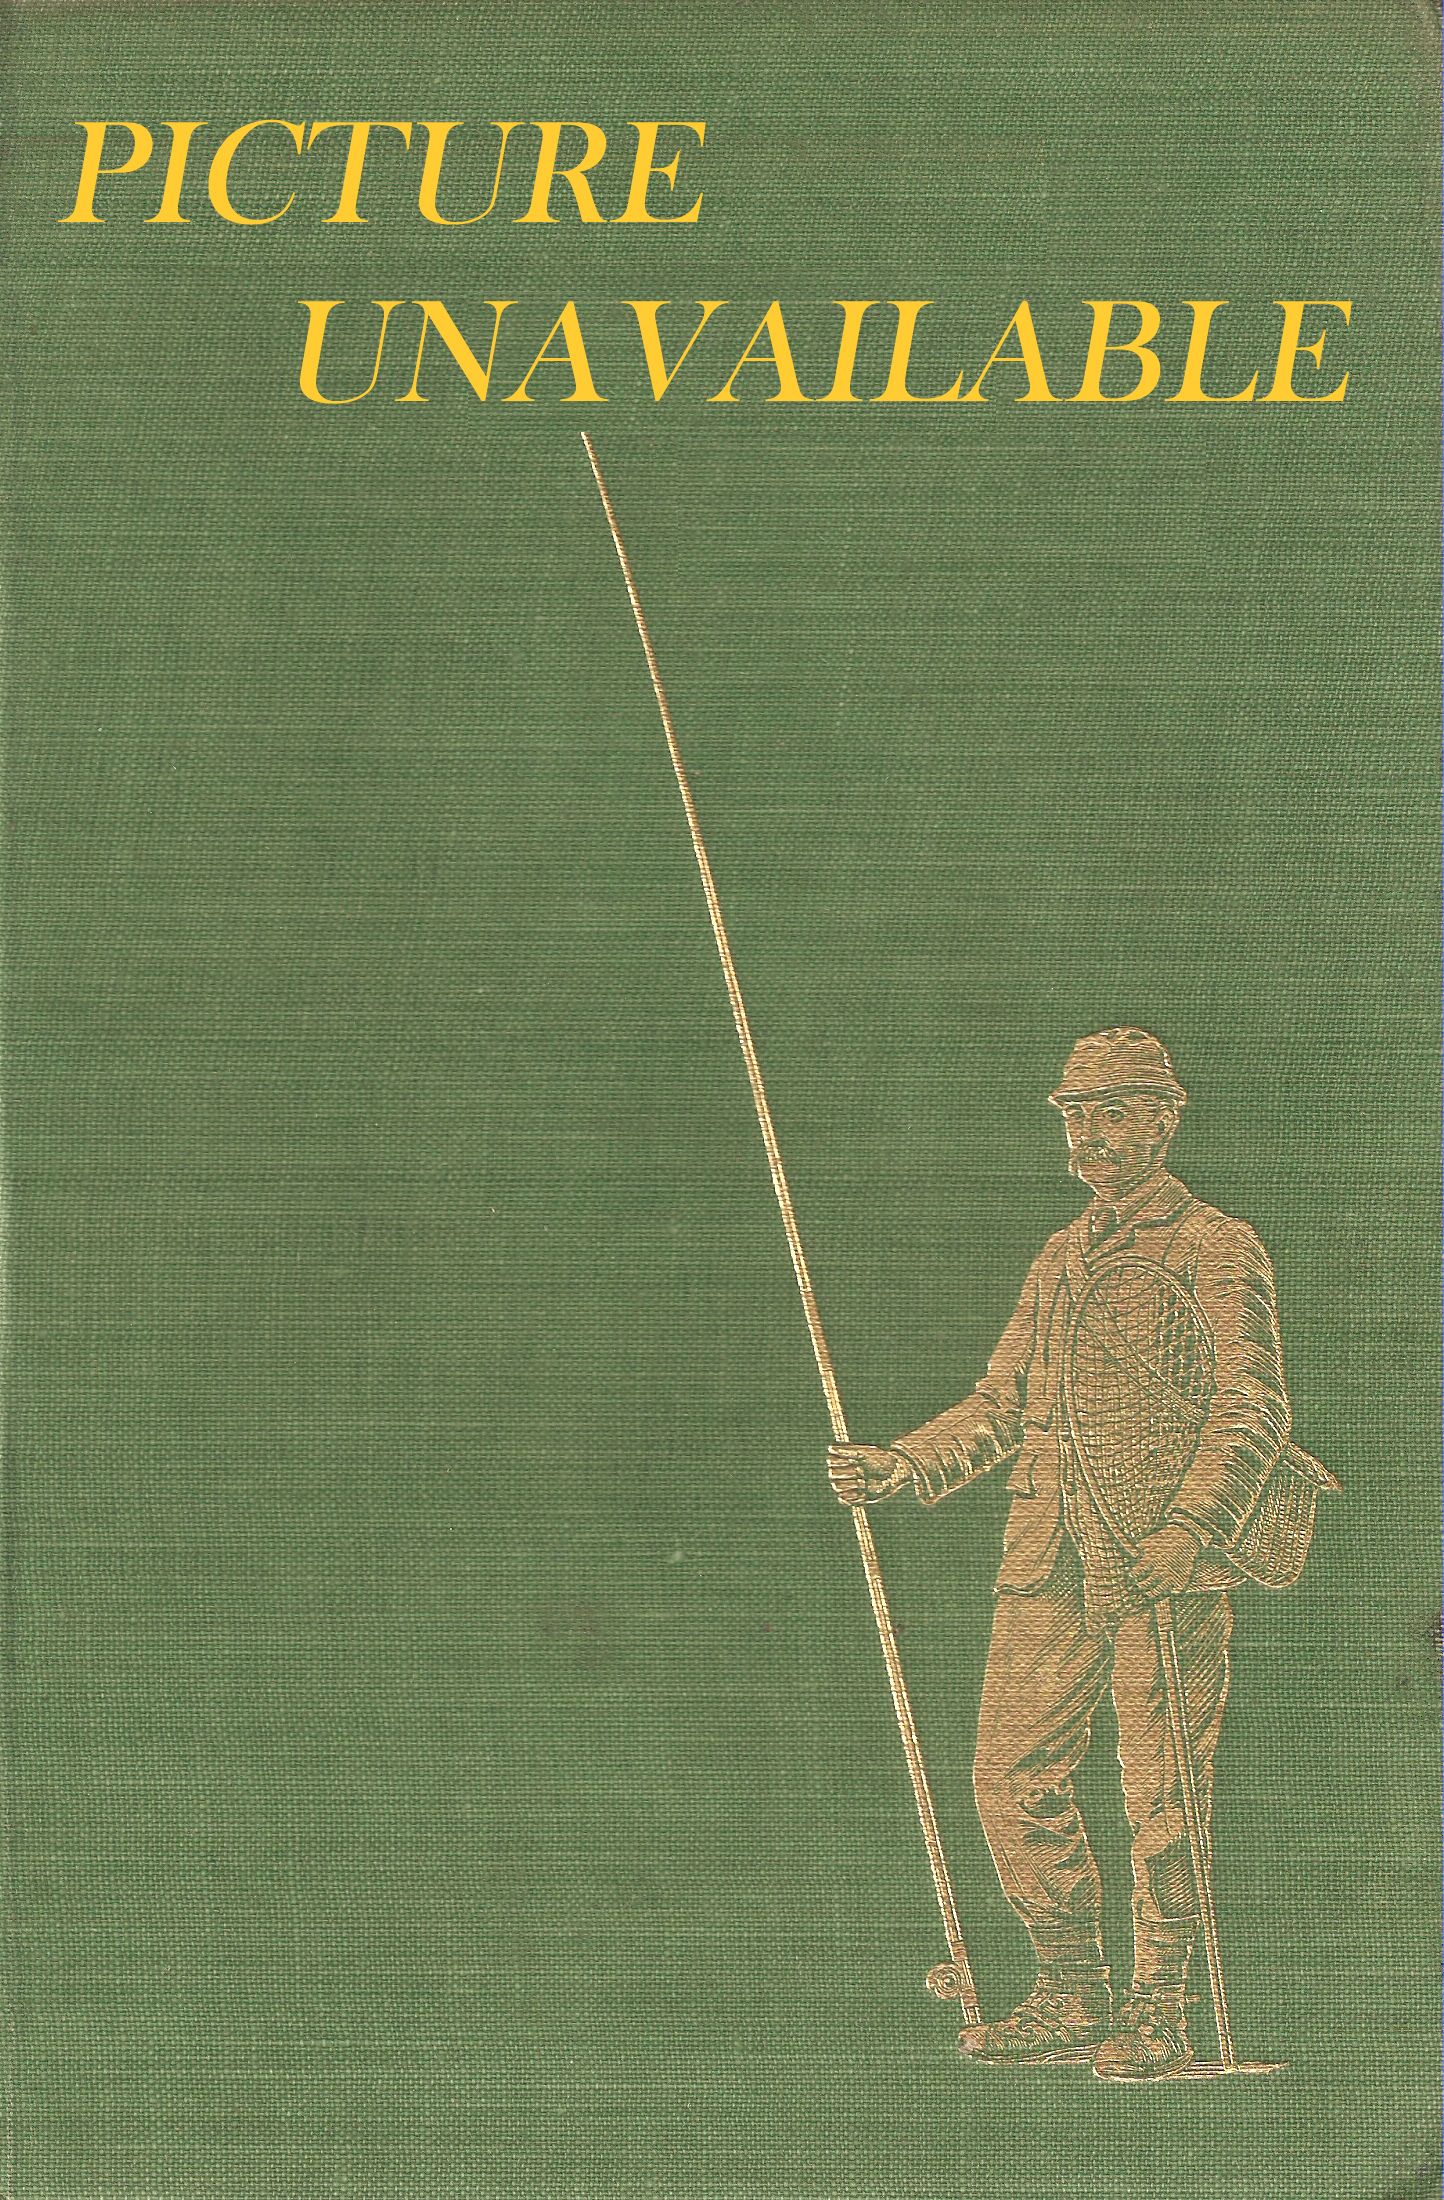 ANGLERS' ANNUAL 1971. Edited by Arthur Oglesby.